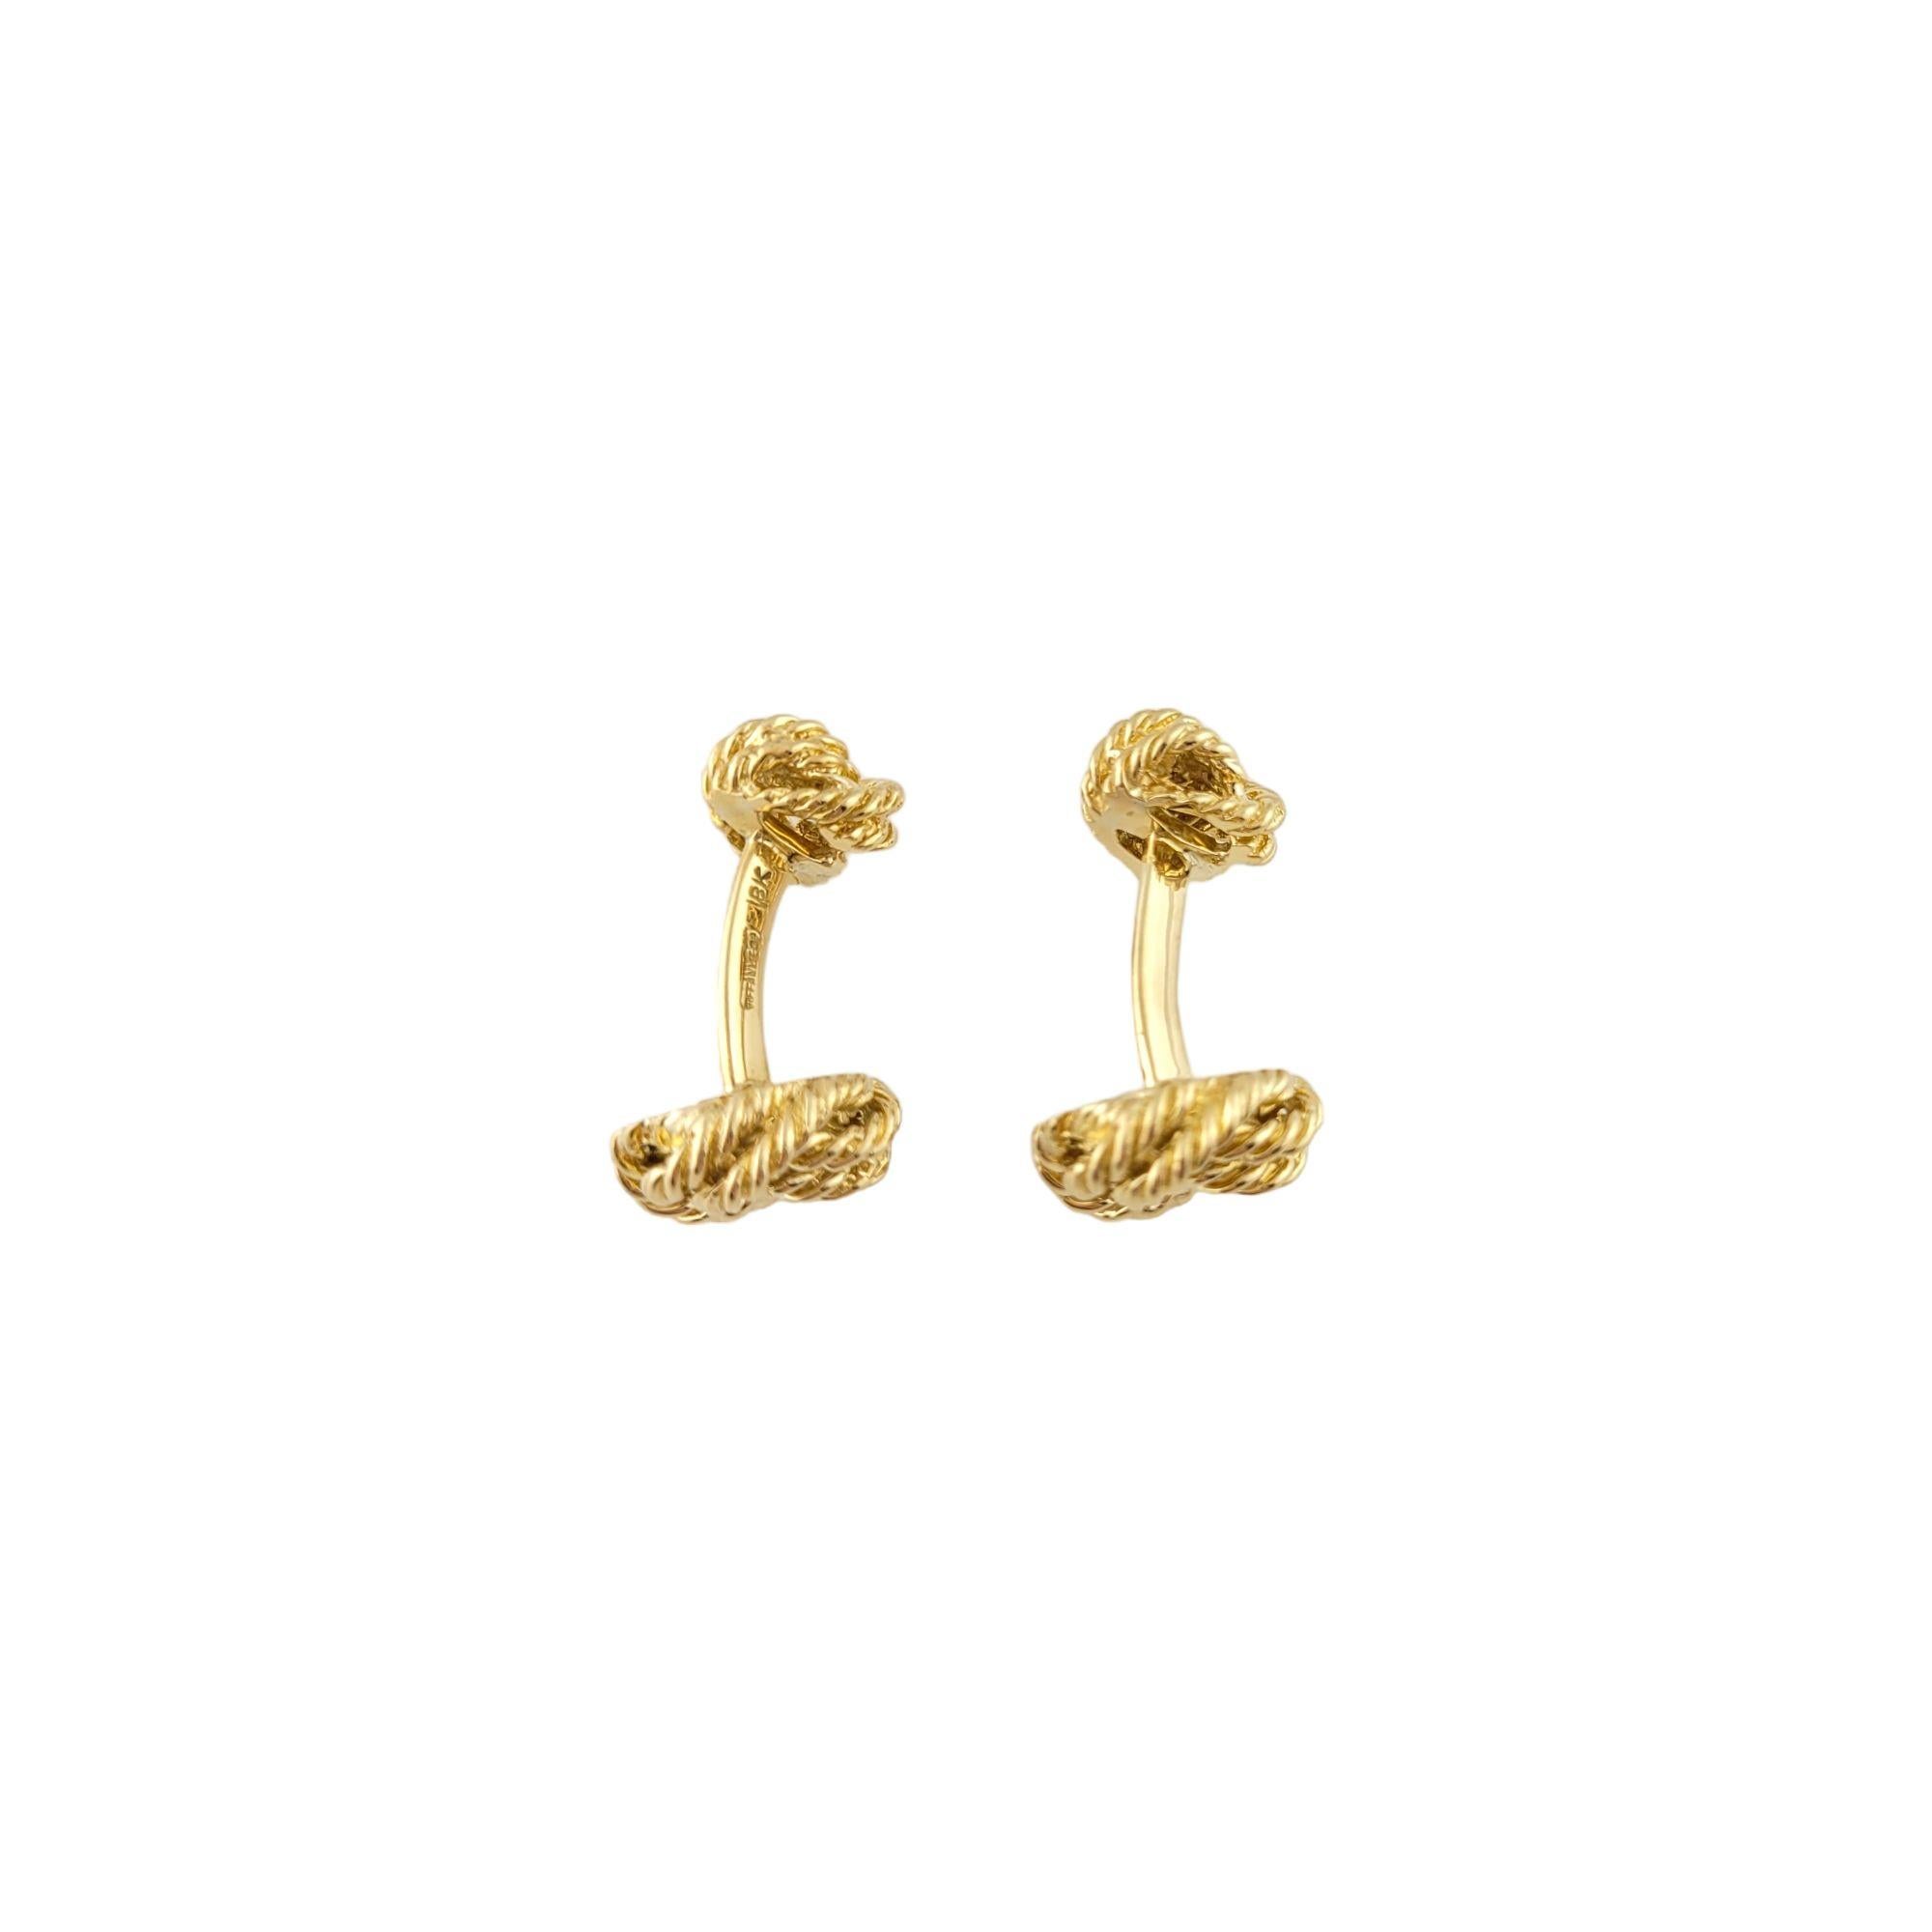 Vintage 18K Yellow Gold Tiffany & Co Knot Cufflinks

Beautiful 18K gold cufflinks by designer Tiffany & Co

Size (larger knot): 14mm X 14mm X 6mm
Size (smaller knot): 10mm X 10mm X 6mm

Weight: 13.9 g/ 8.9 dwt

Hallmark: 18K Tiffany & Co

Very good